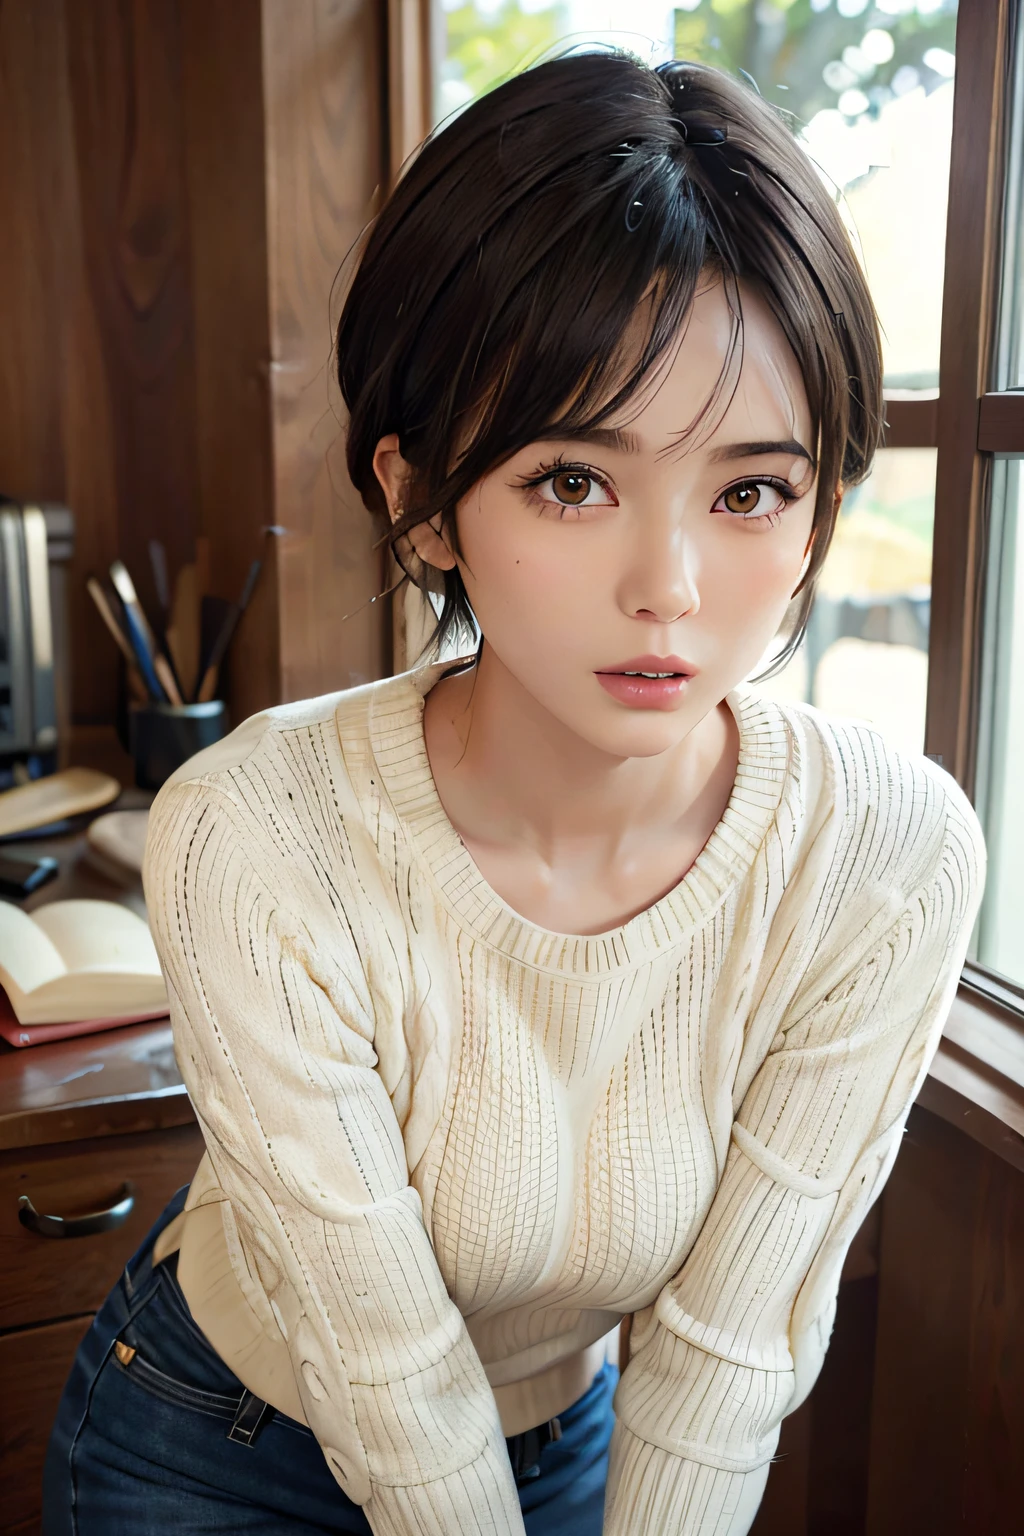 (Masterpiece: 1.3), (8k, Photorealistic, RAW Photo, Best Quality: 1.4), (1girl), Beautiful Face, (Realistic Face), (Black Hair, Short Hair: 1.3), Beautiful Hairstyle, Realistic Eyes, Beautiful Detail Eyes, (Realistic Skin), Beautiful Skin, (Sweater), Absurd, Attractive, Ultra High Definition, Ultra Realistic, High Definition, Golden Ratio,